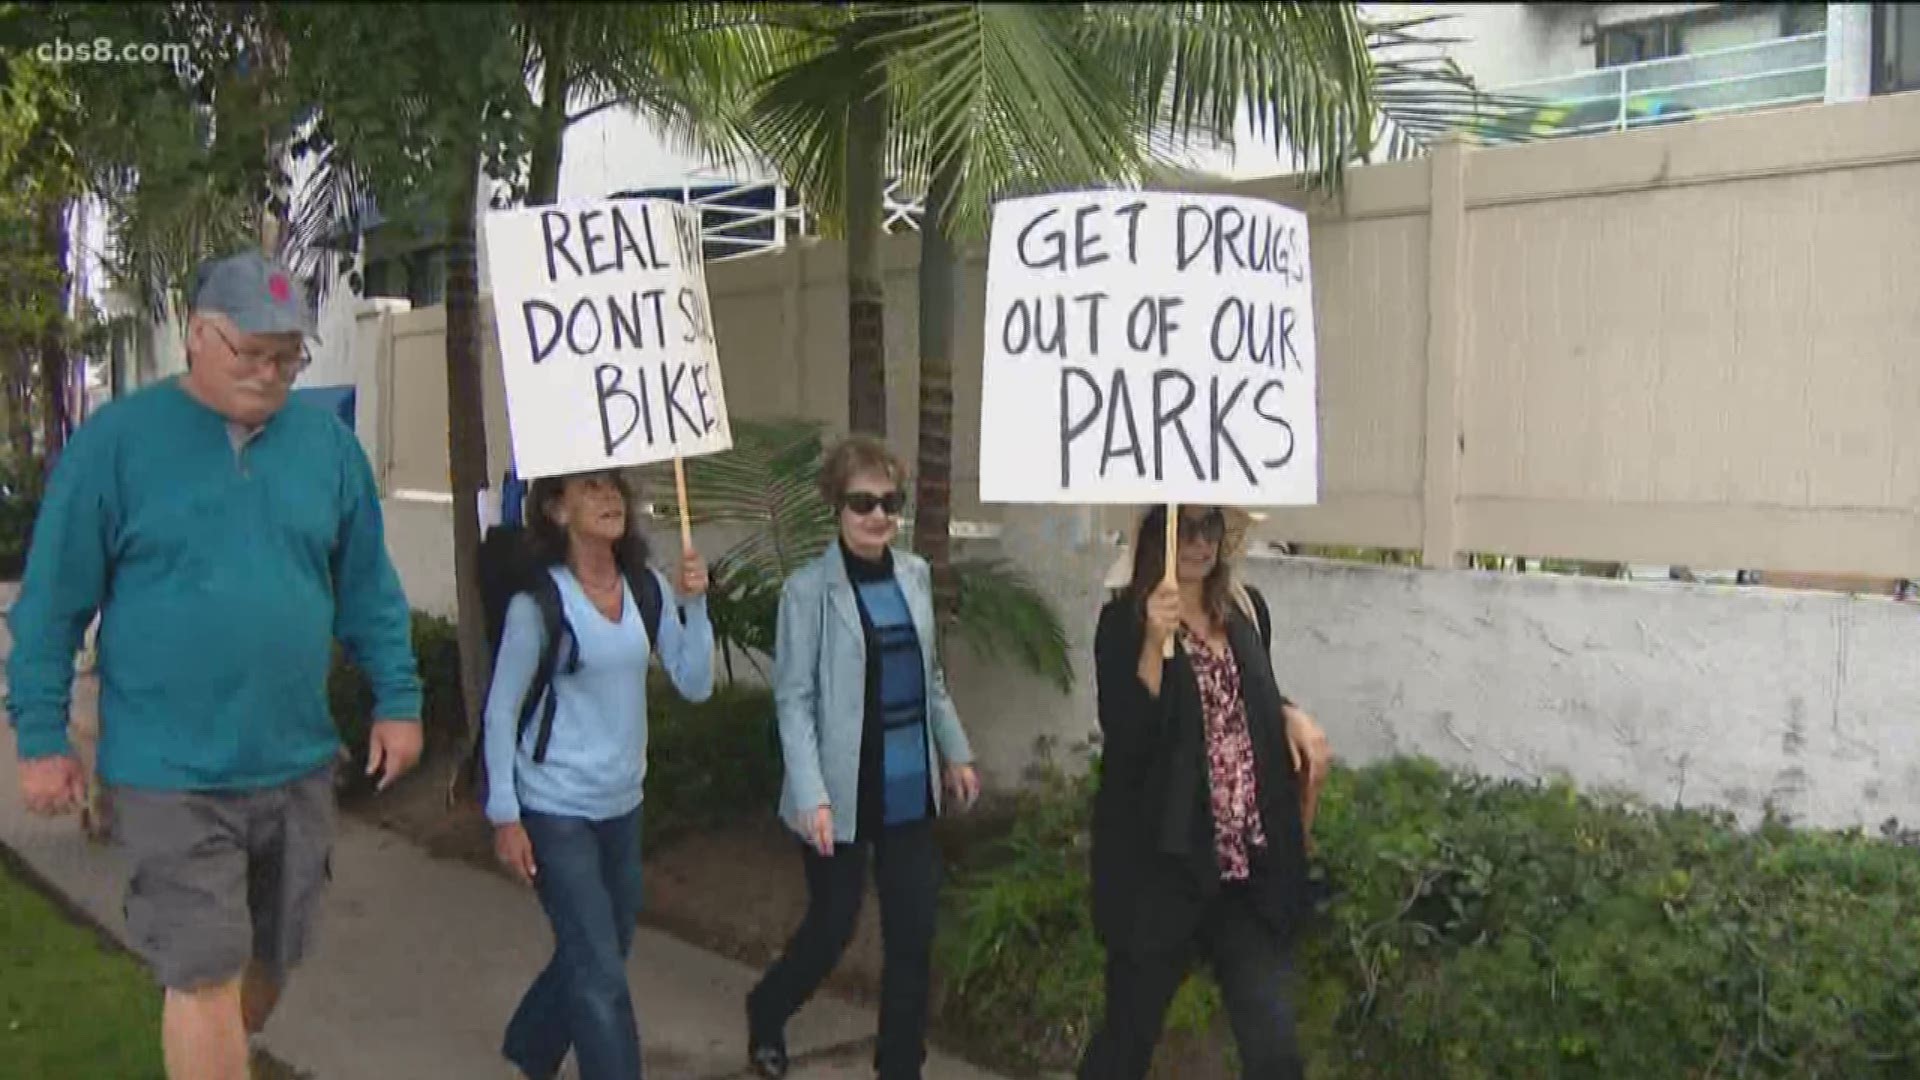 People in PB are asking city leaders to introduce new policies that will take a bite out of petty and even violent crime.